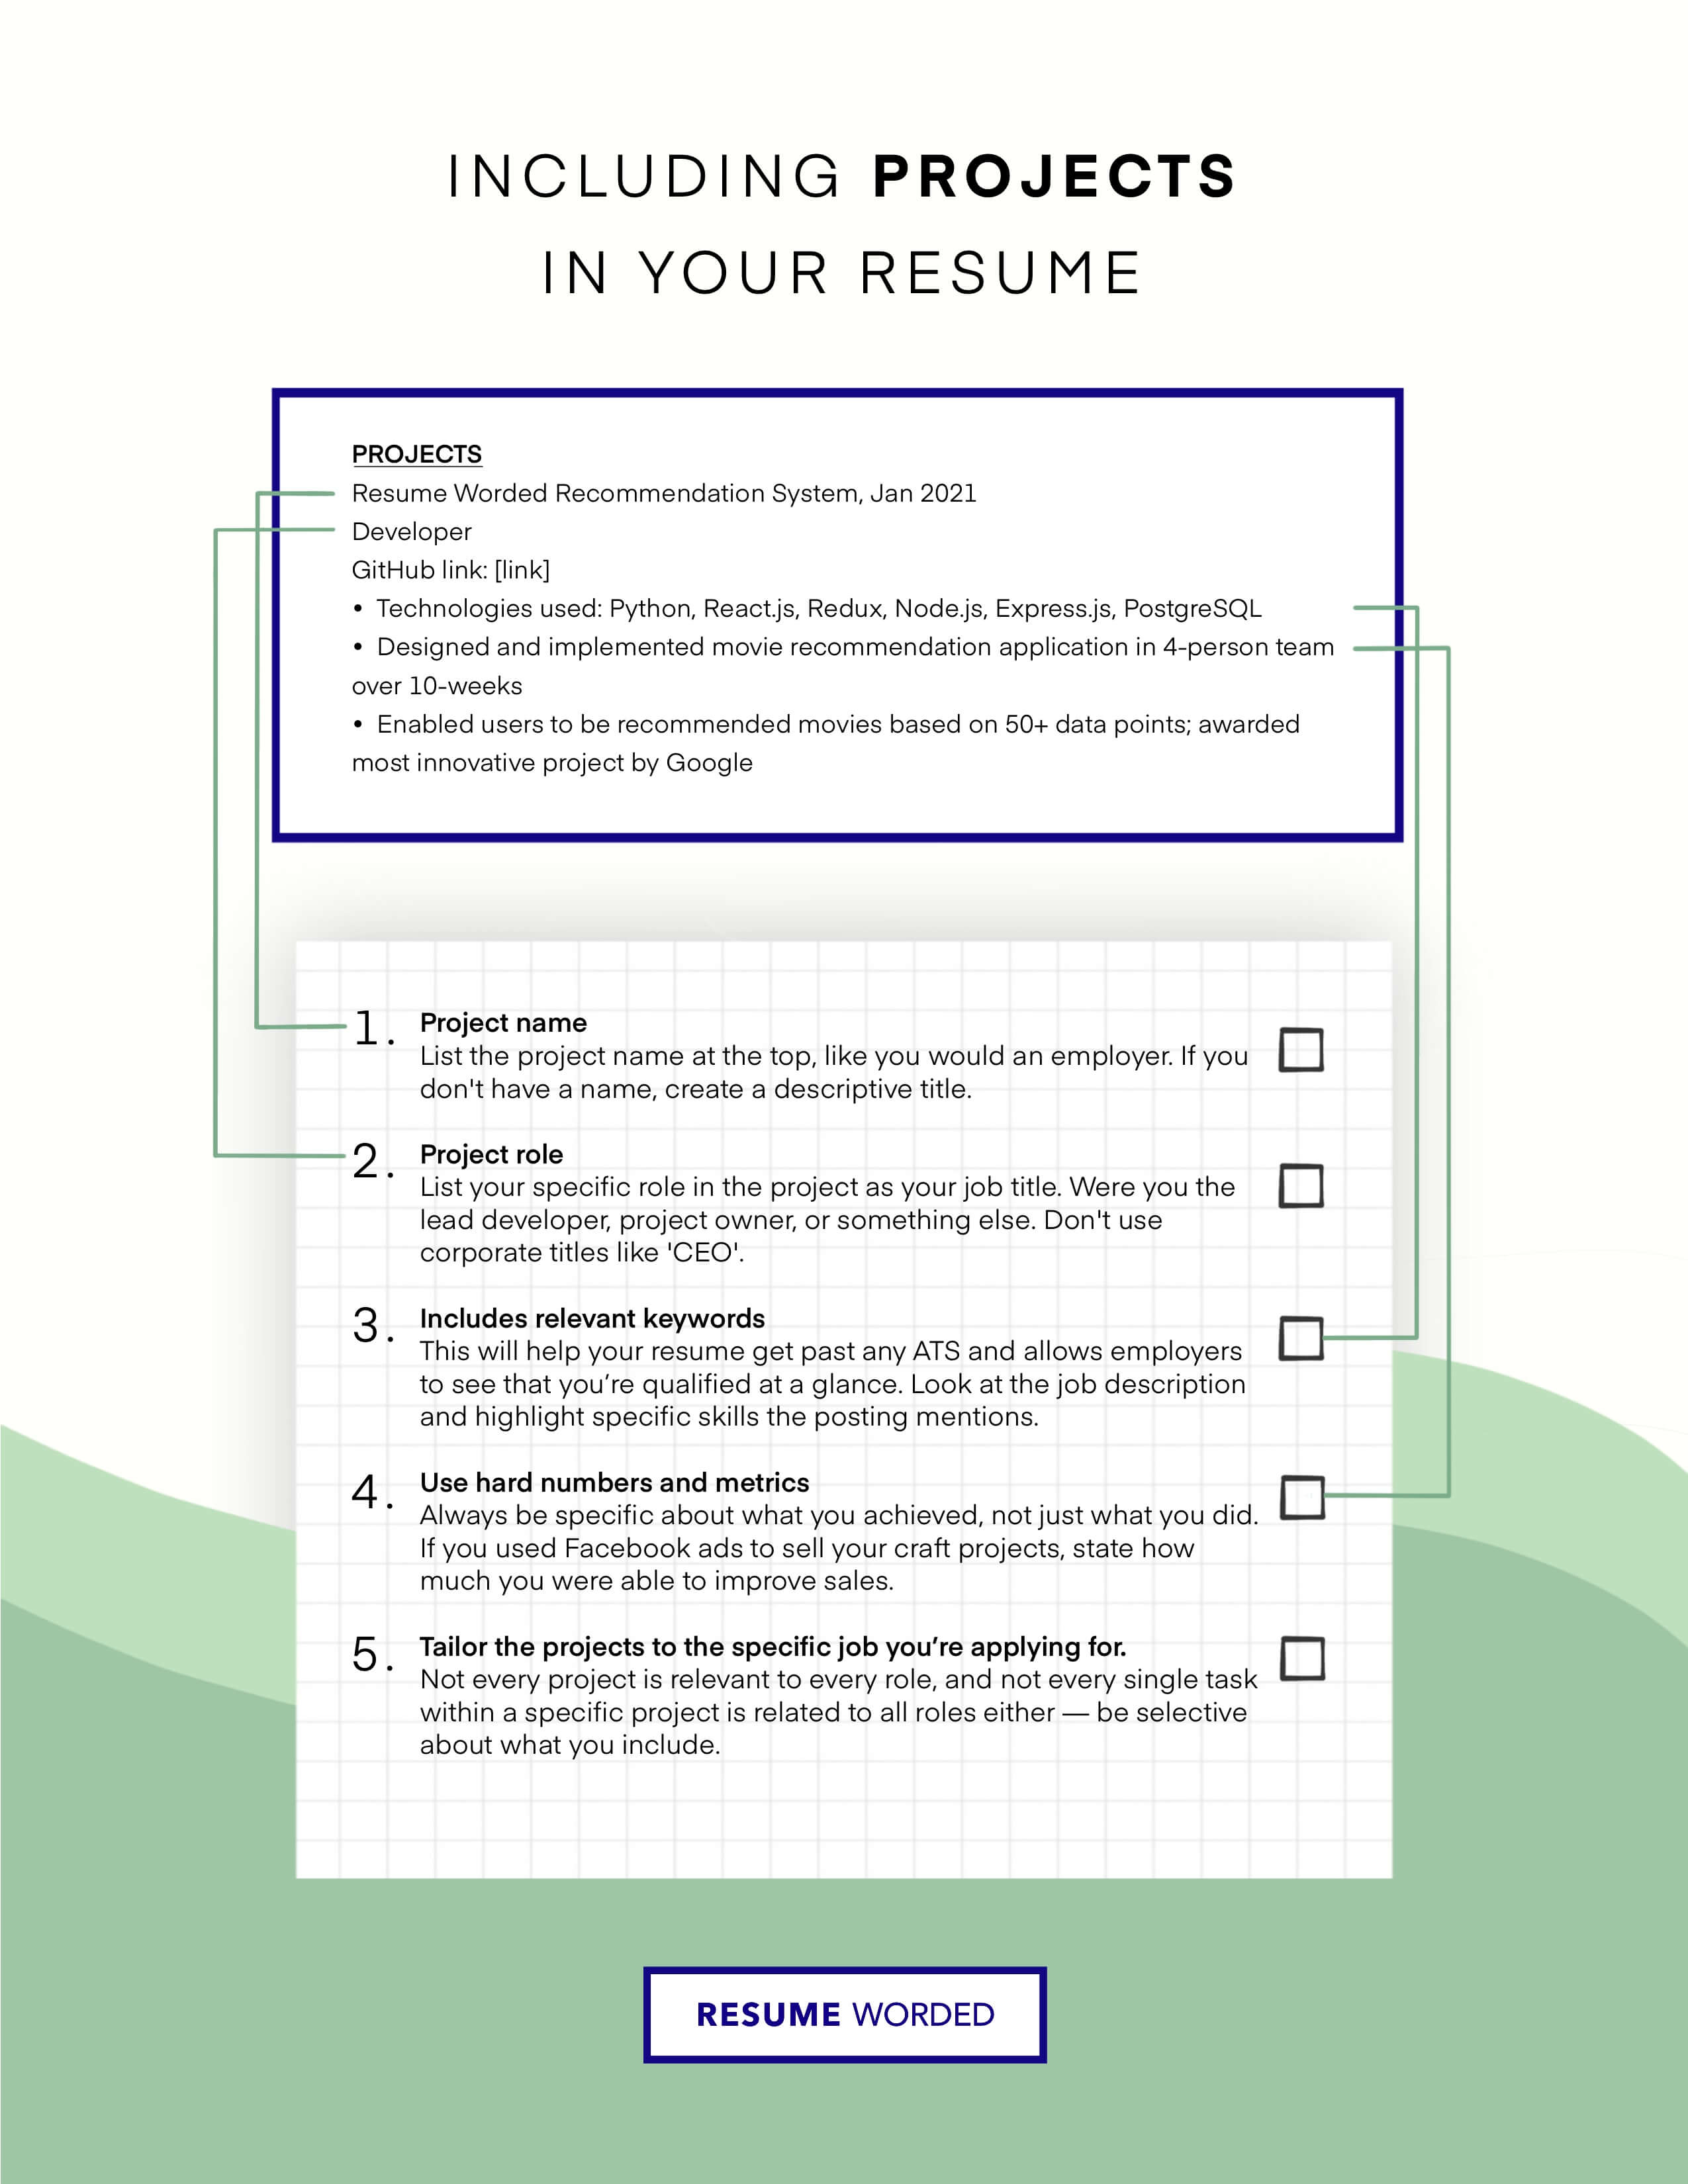 how to write a project description in resume